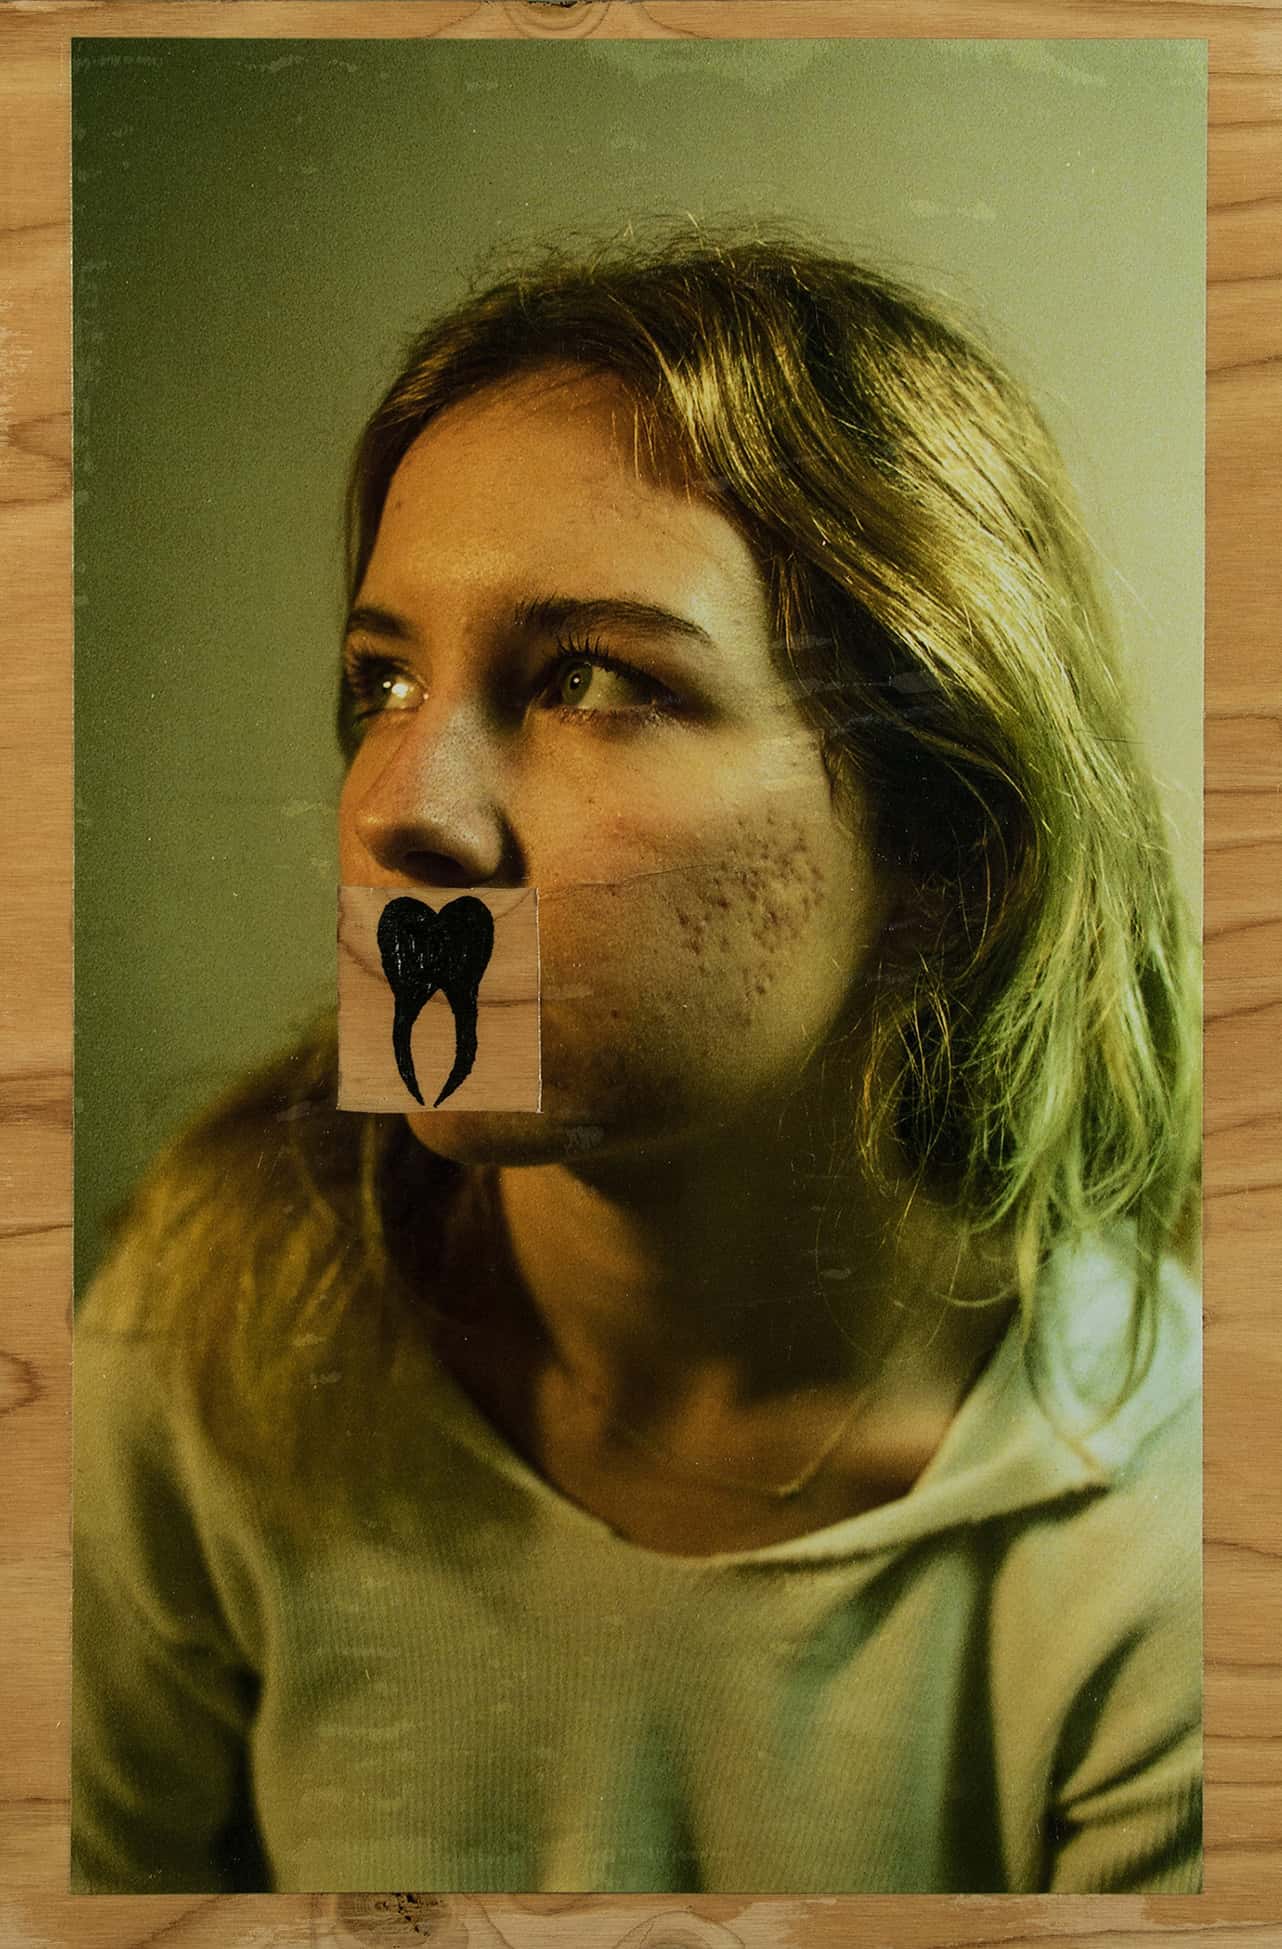 A photo of a girl looking forward with a tooth drawn over her mouth on a wooden background.